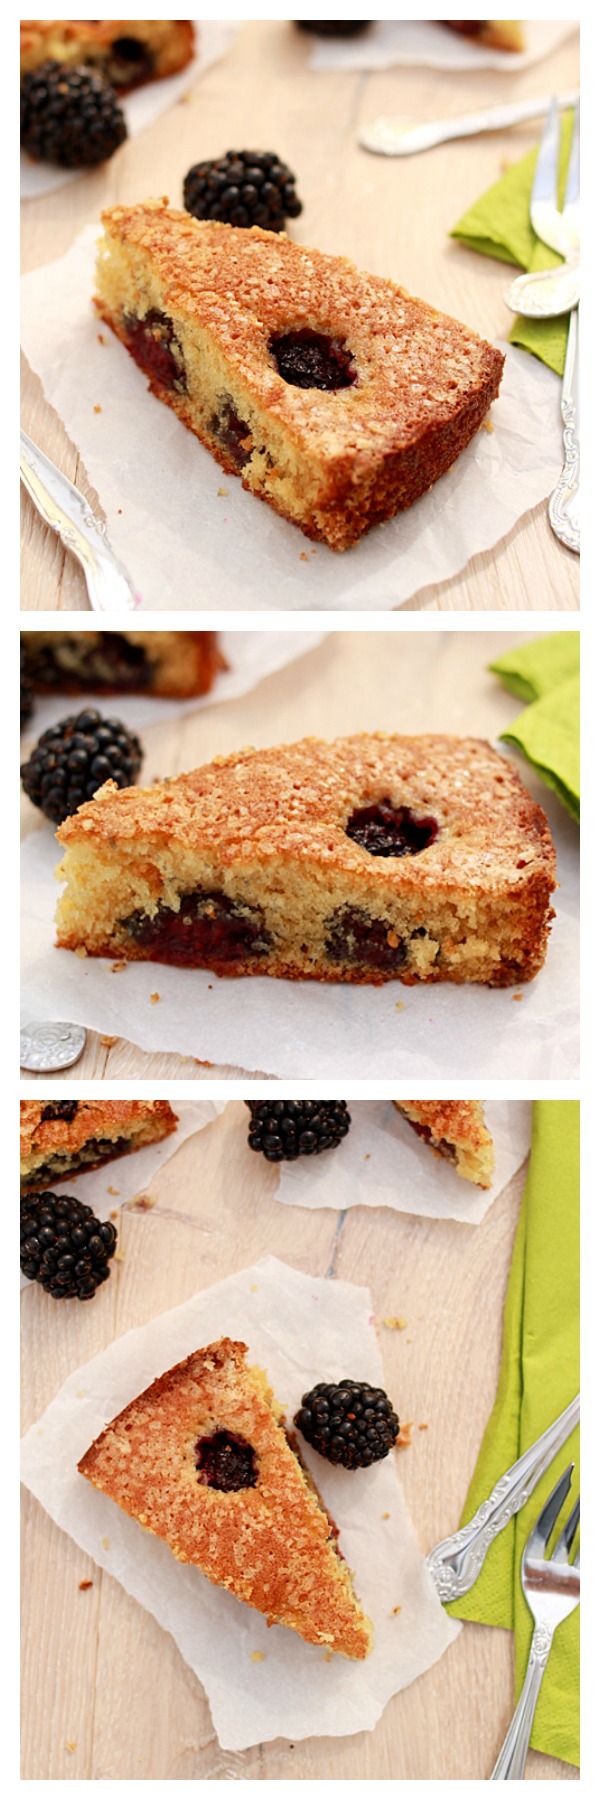 Buttermilk cake with blackberries – Buttermilk makes the cake extra moist and delicious, and blackberries pack all the vitamins. Easy baking recipe. | rasamalaysia.com